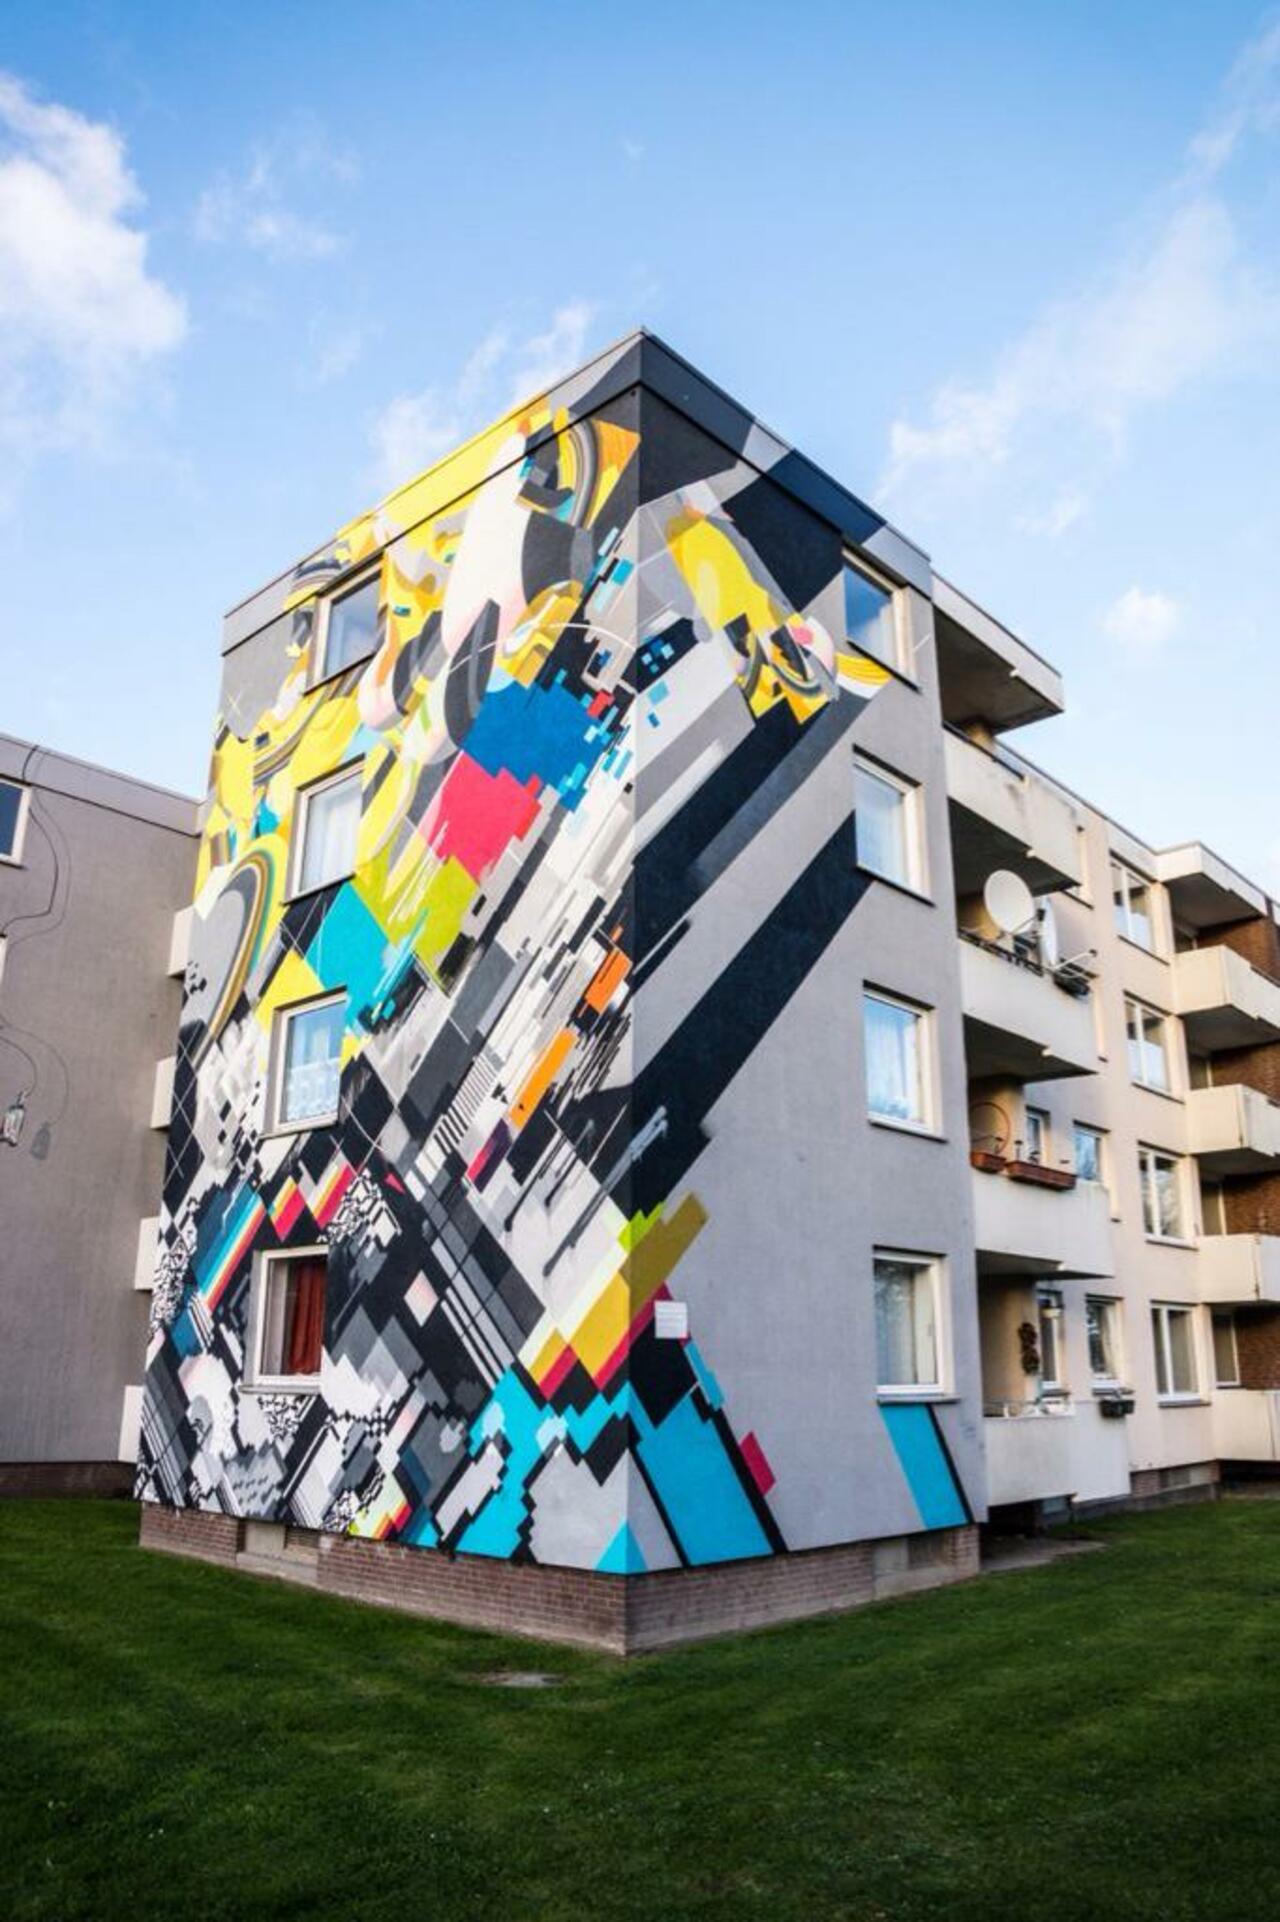 #Graffiti artists SatOne, Roid & Wow123 collaborate on a fresh #mural in Bremen, Germany.

http://wp.me/p2dpFM-2y2 http://t.co/669lyxram2